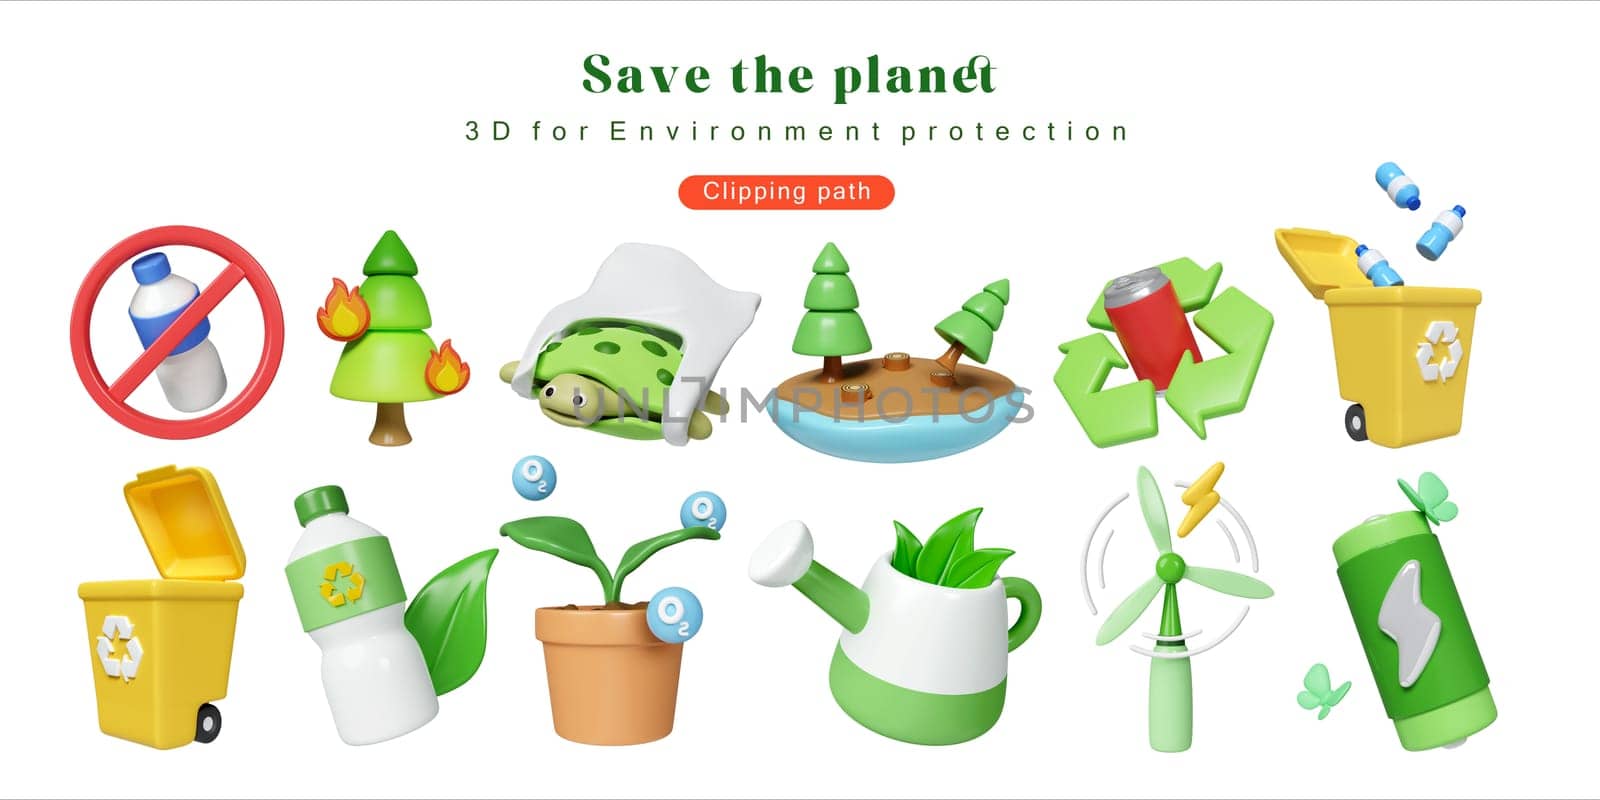 Eco Global Warming icon set Illustration Eco global warming icons for Environment protection, save the planet, for poster, web, social media post. 3D Illustration by meepiangraphic